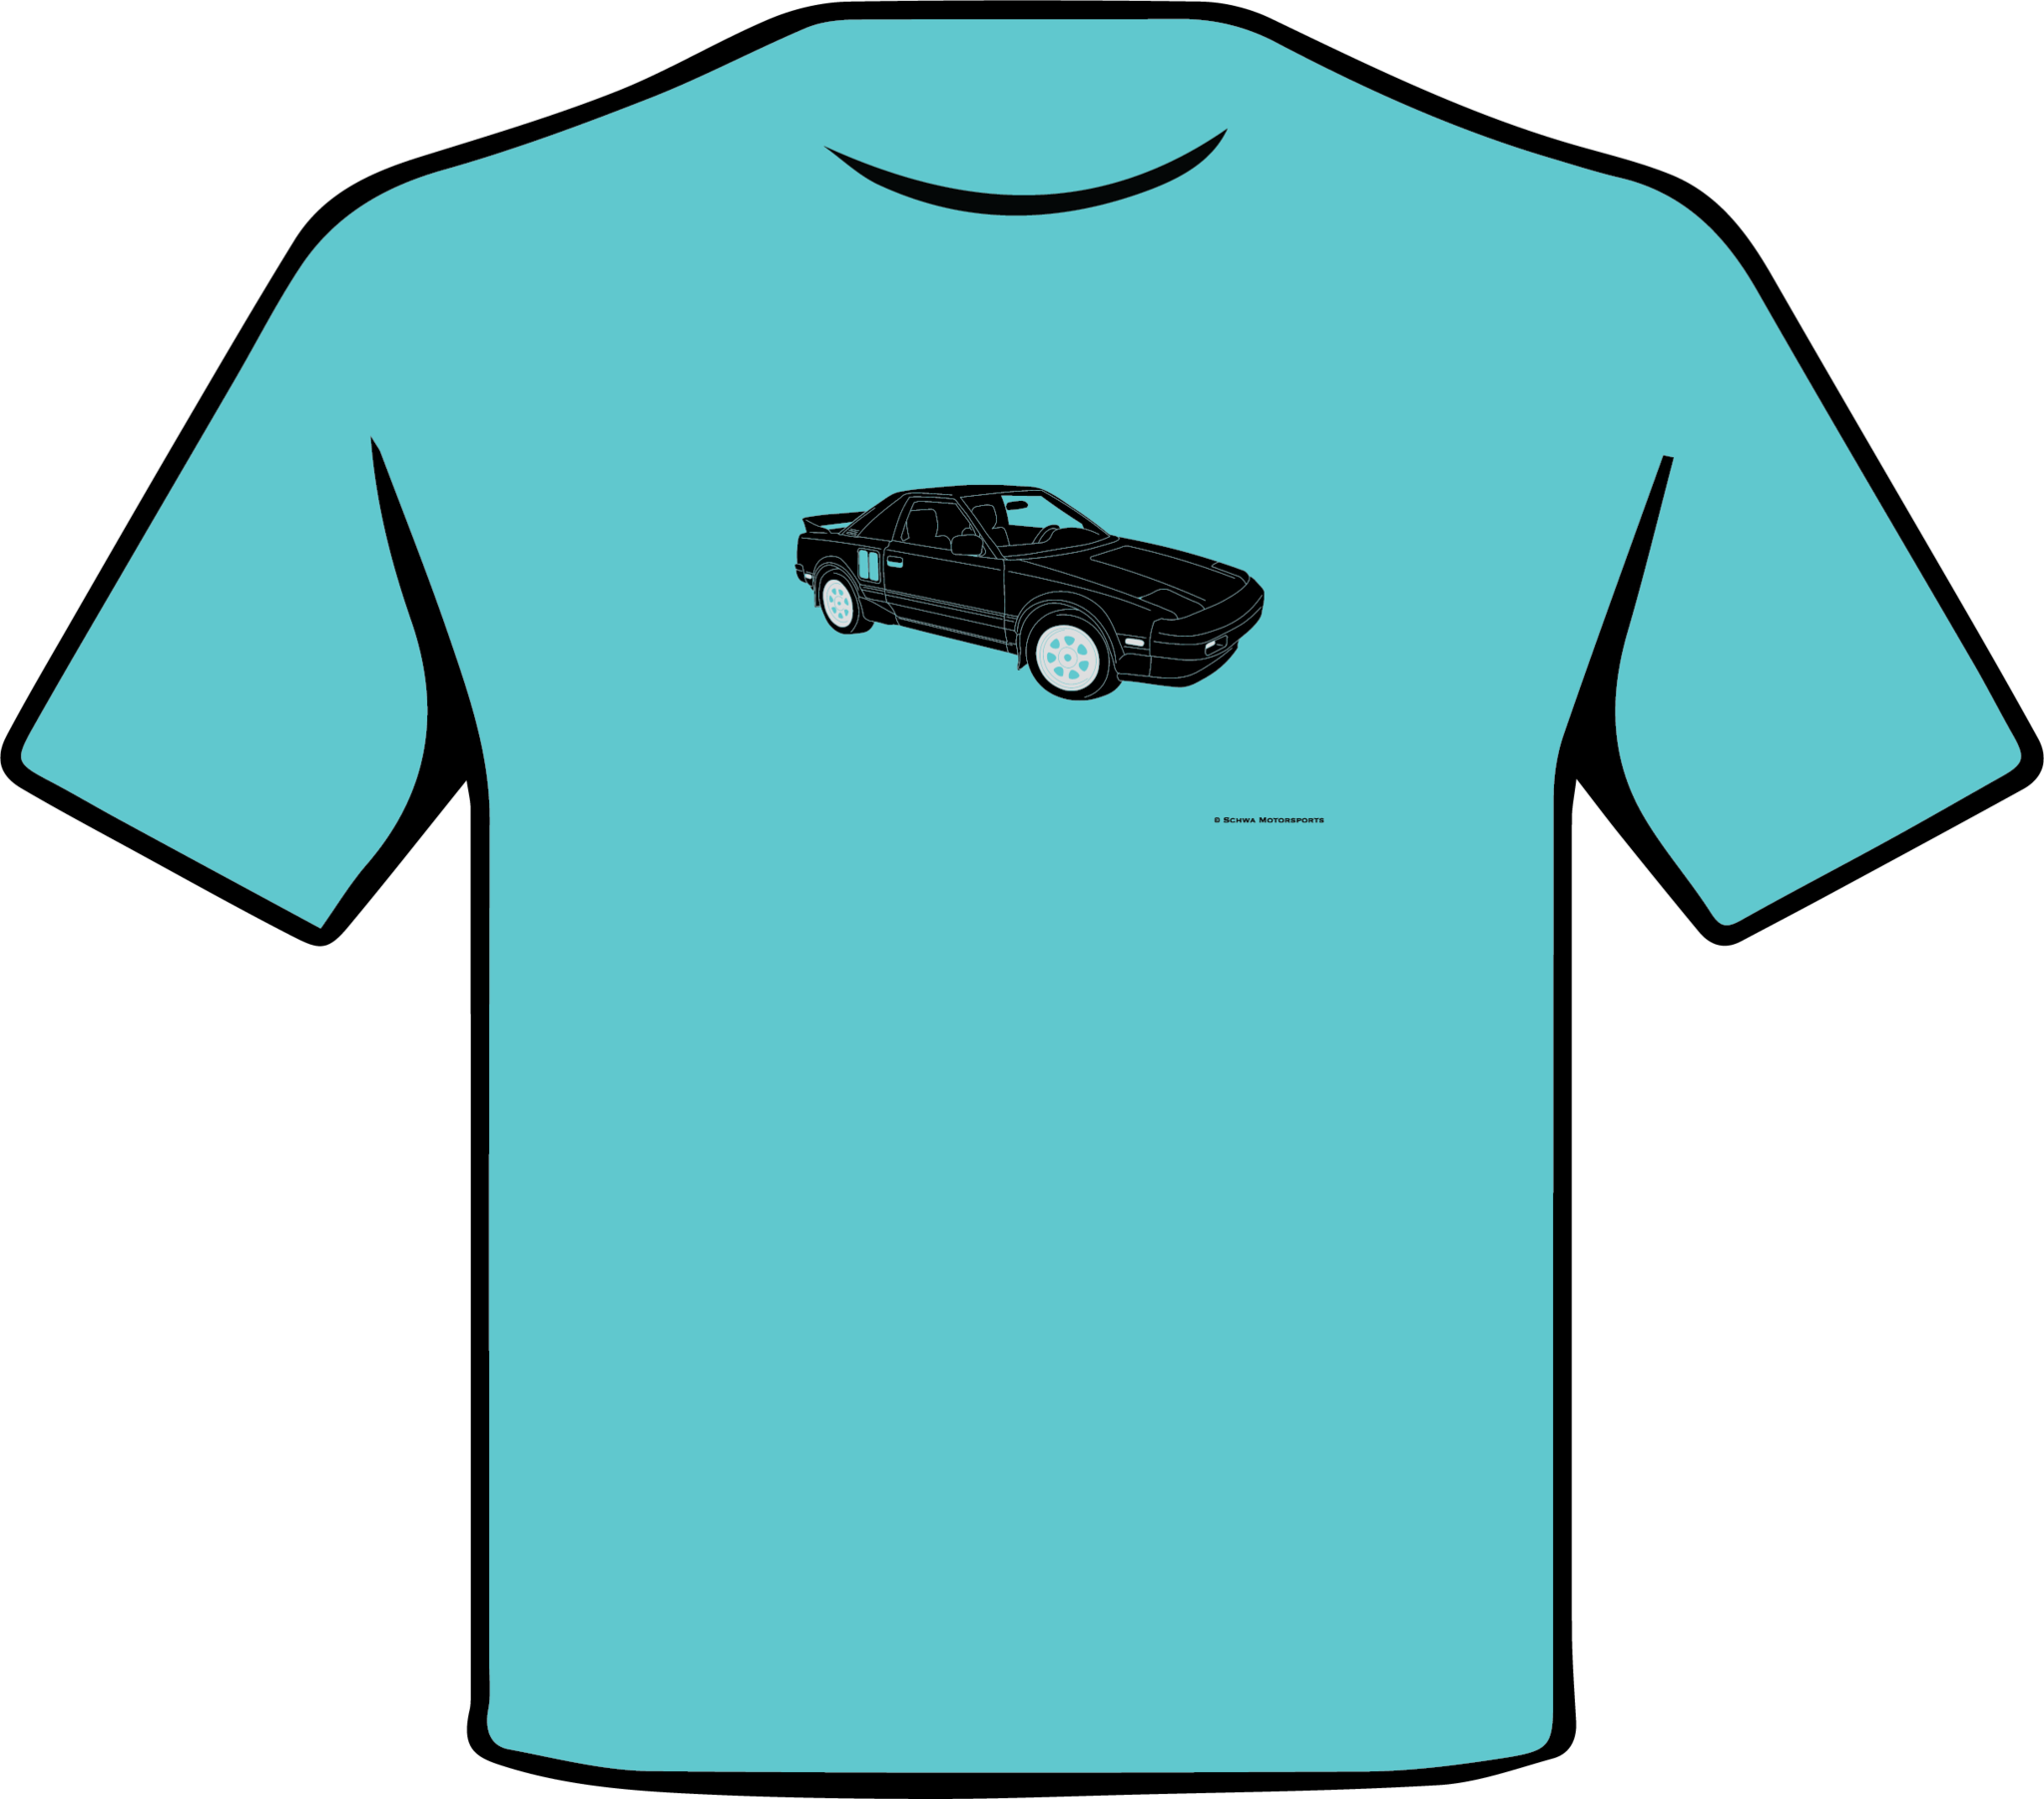 Toyota MR2 Front 3/4 Angle Multi Color T-Shirt